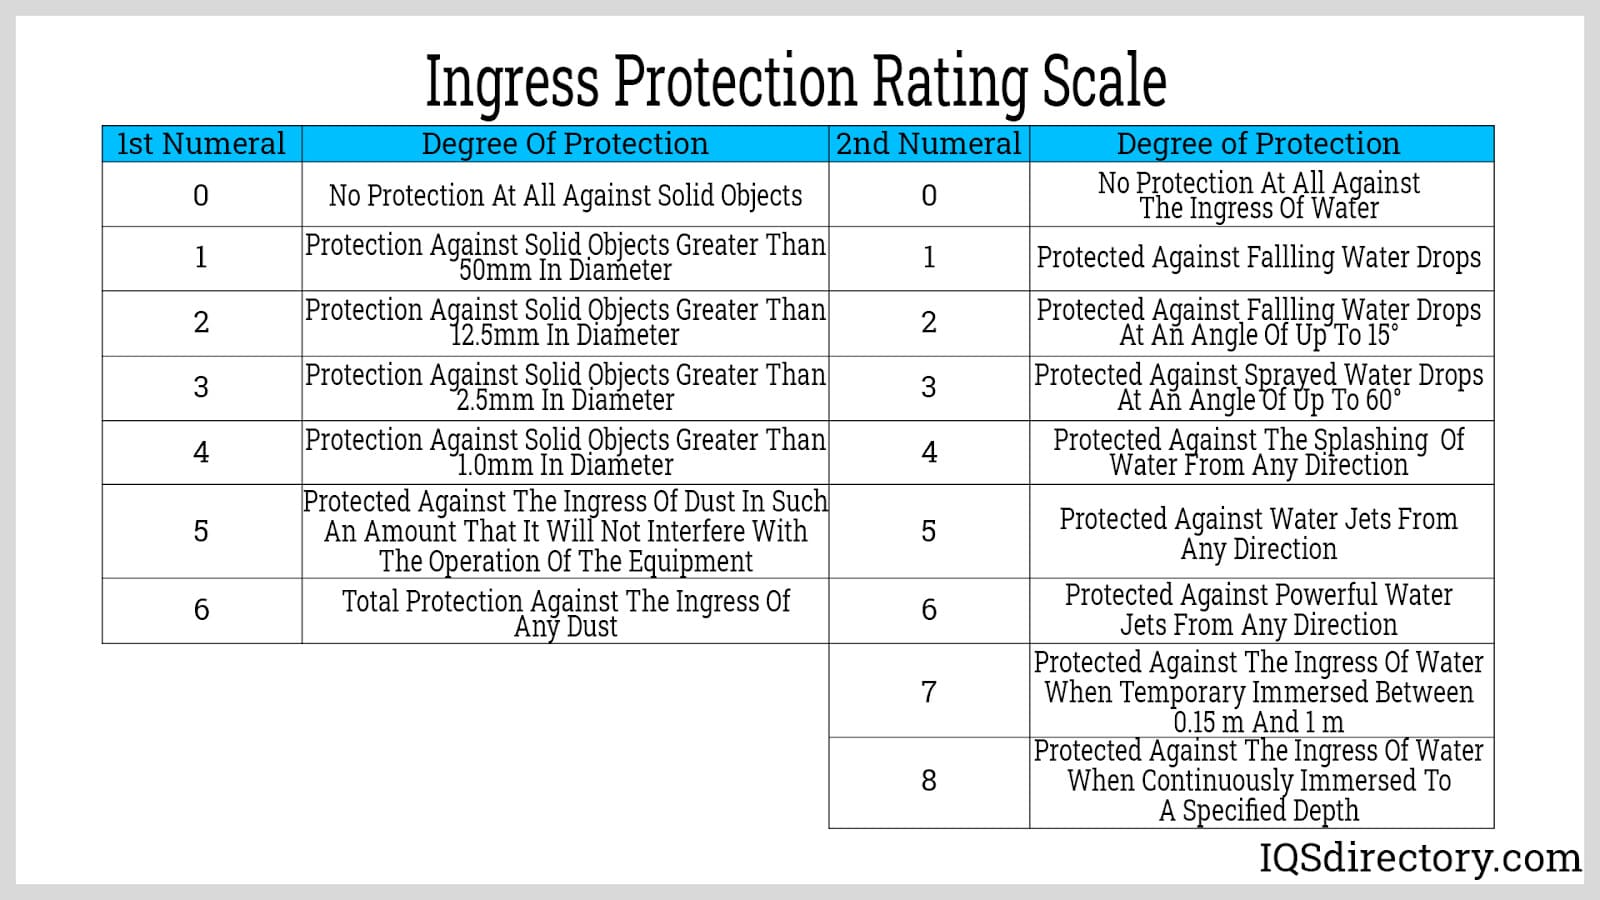 Ingress Protection Rating Scale